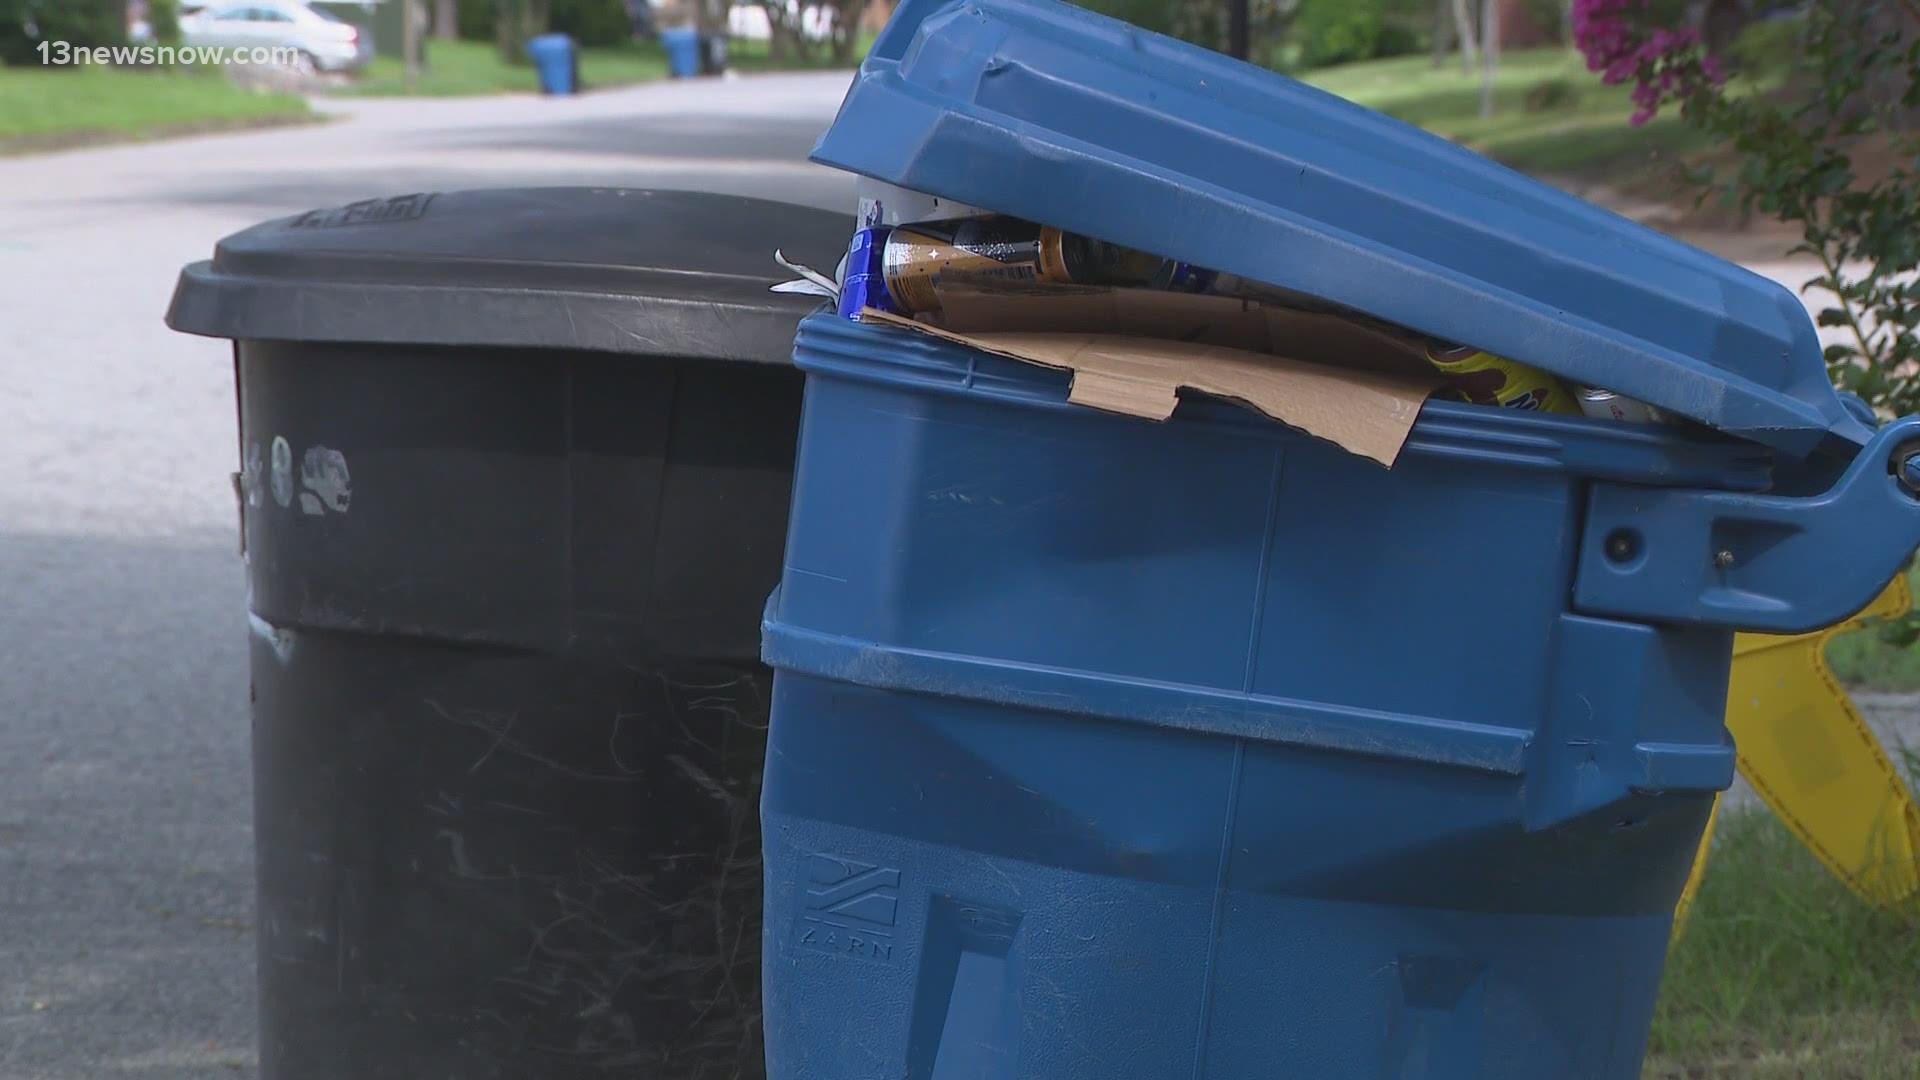 Recycling delays hit Newport News; city workers explain why